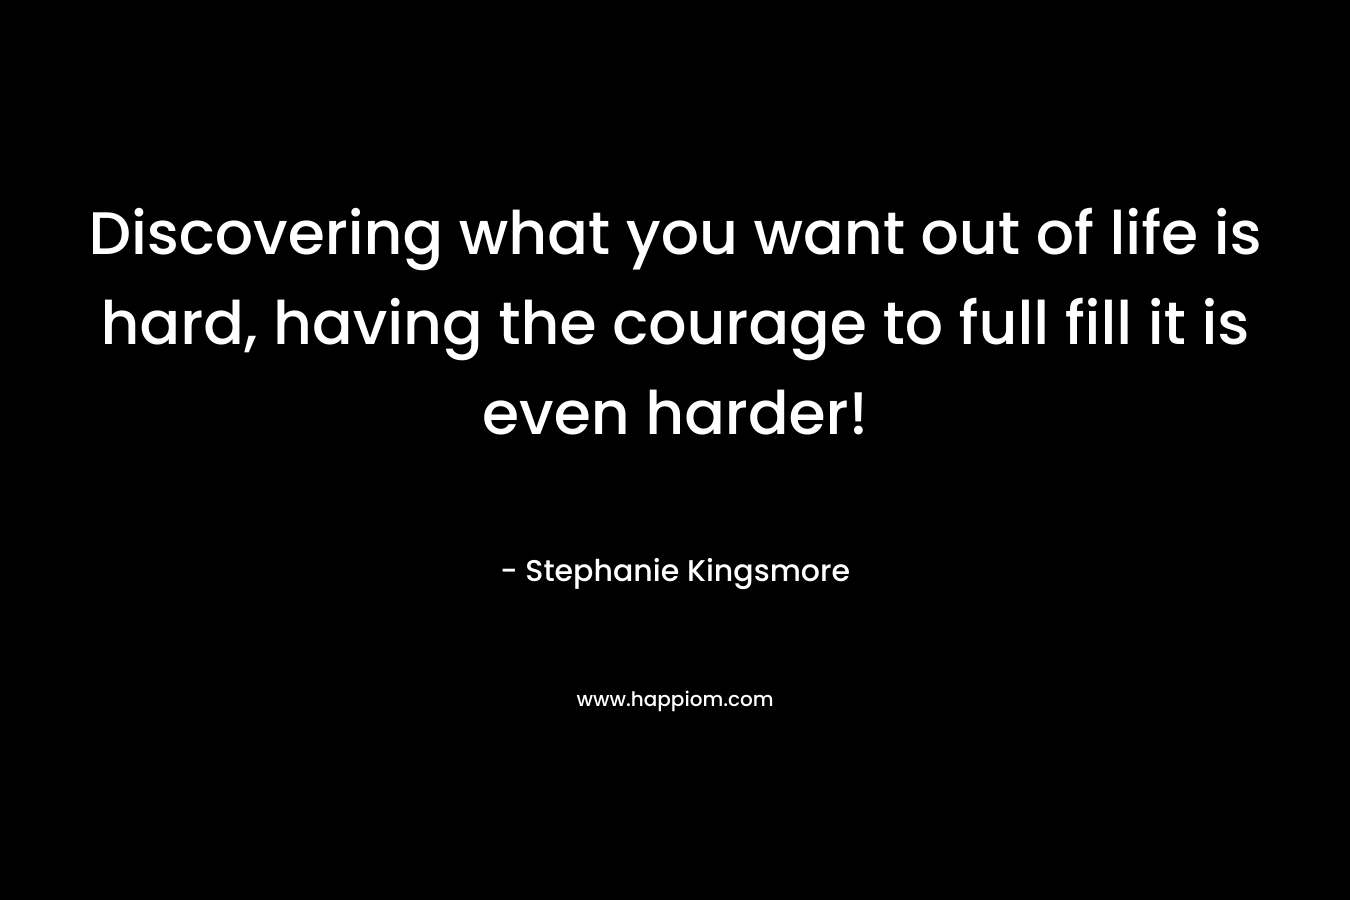 Discovering what you want out of life is hard, having the courage to full fill it is even harder!